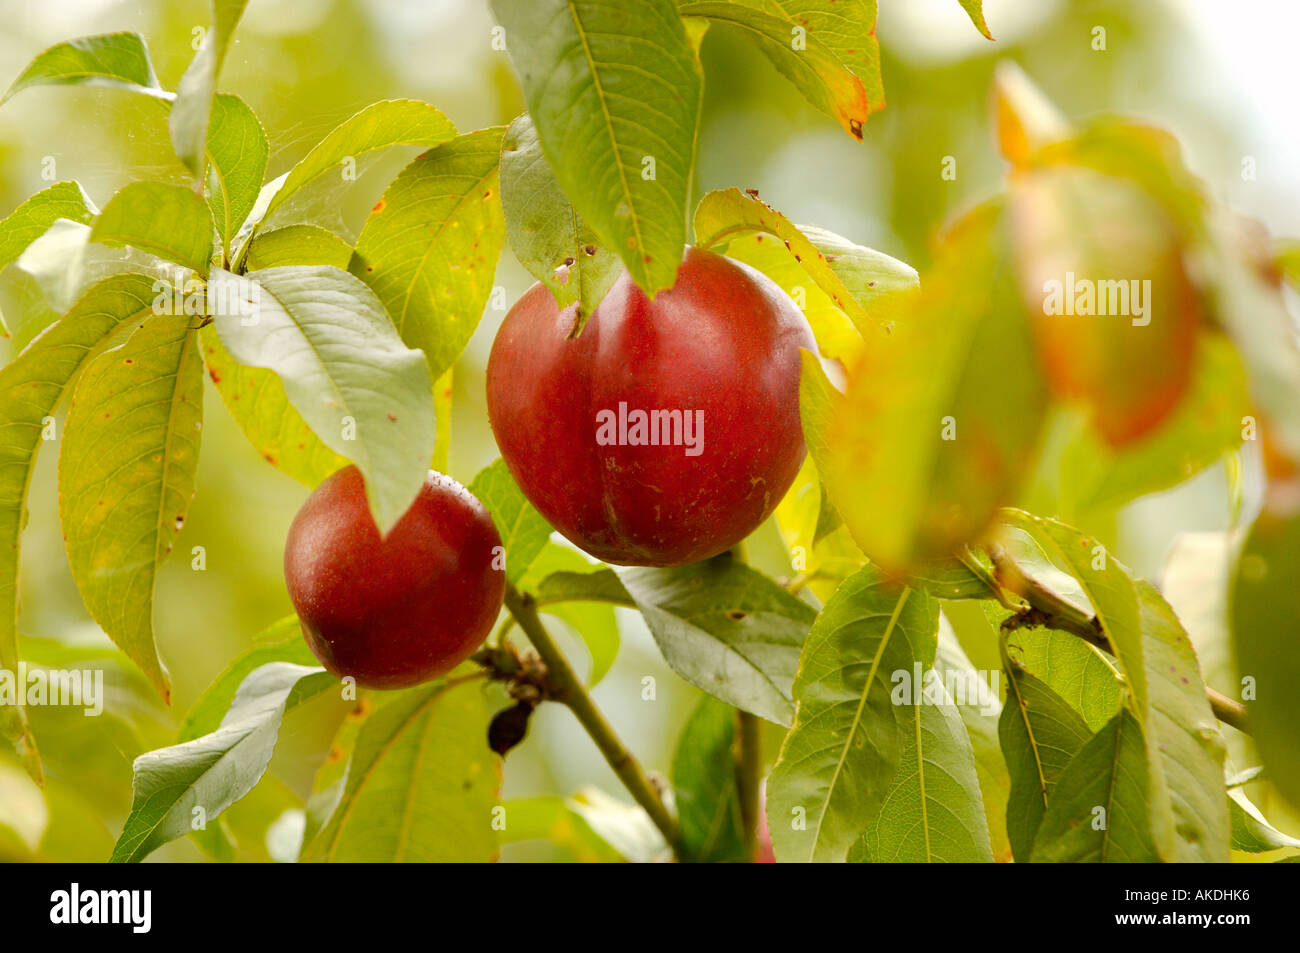 Nectarines growing on a tree Stock Photo